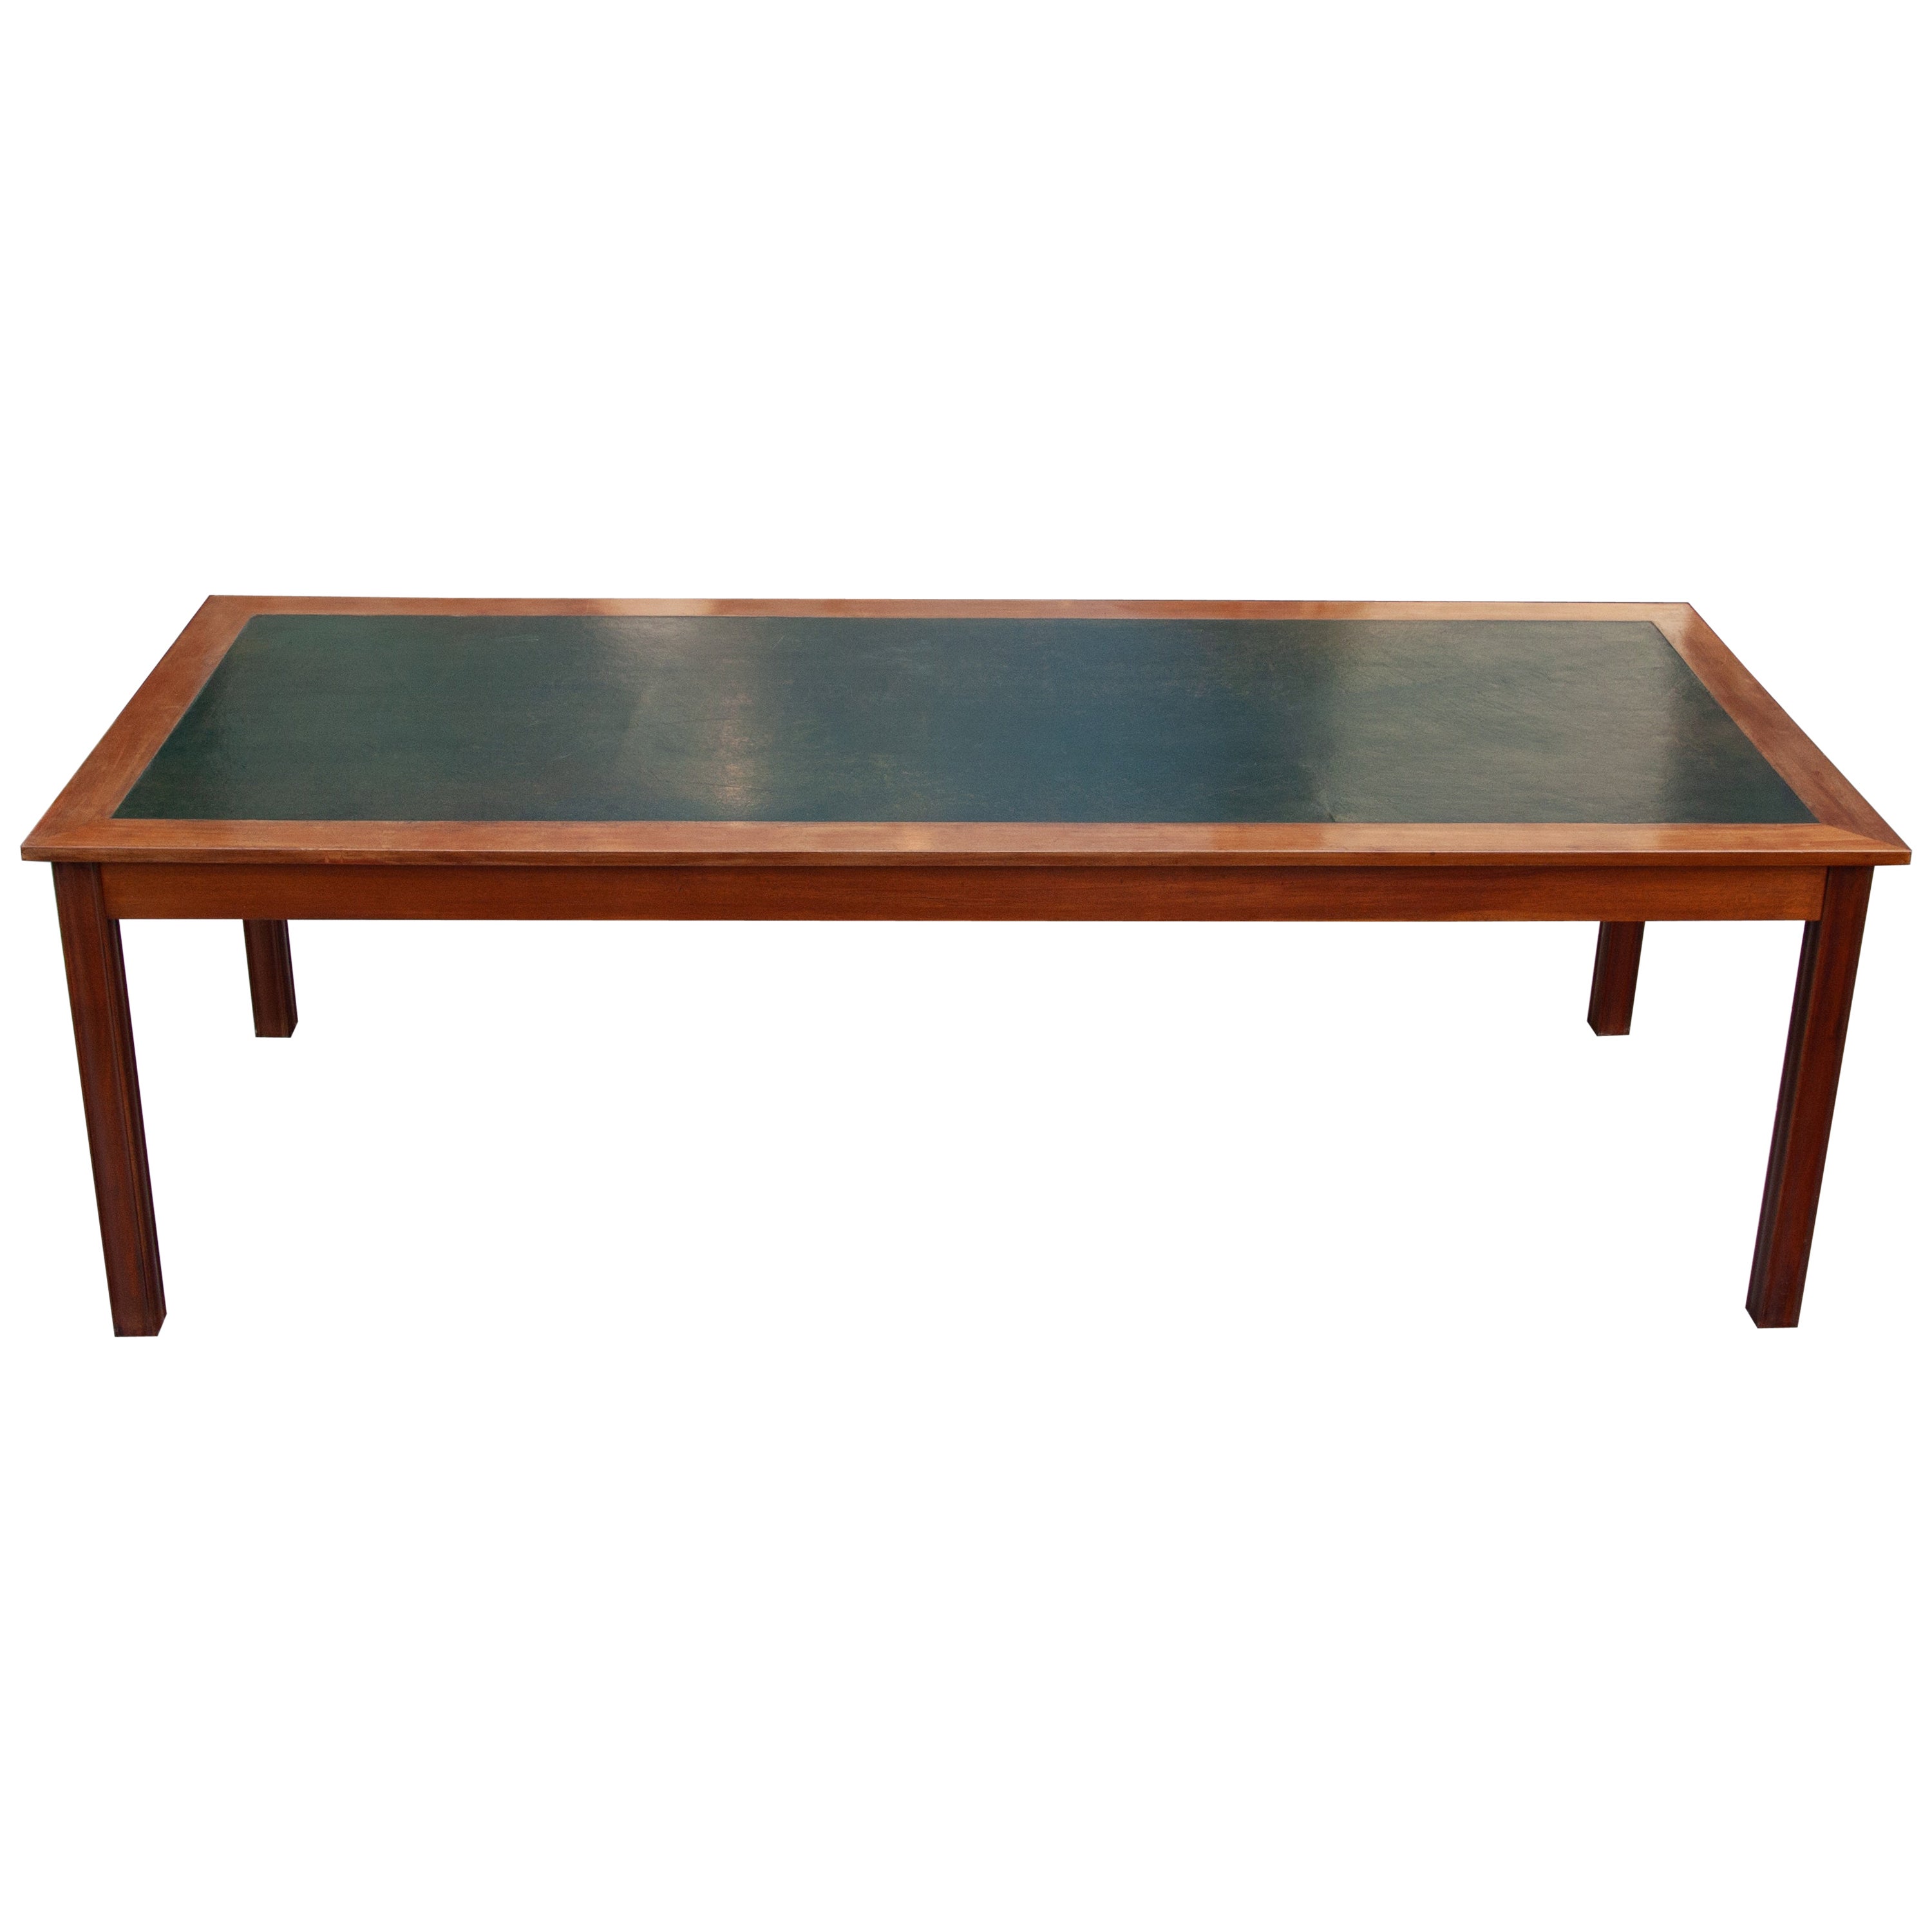 Large Mahogany Library or Dining Table, 1940s, Danish